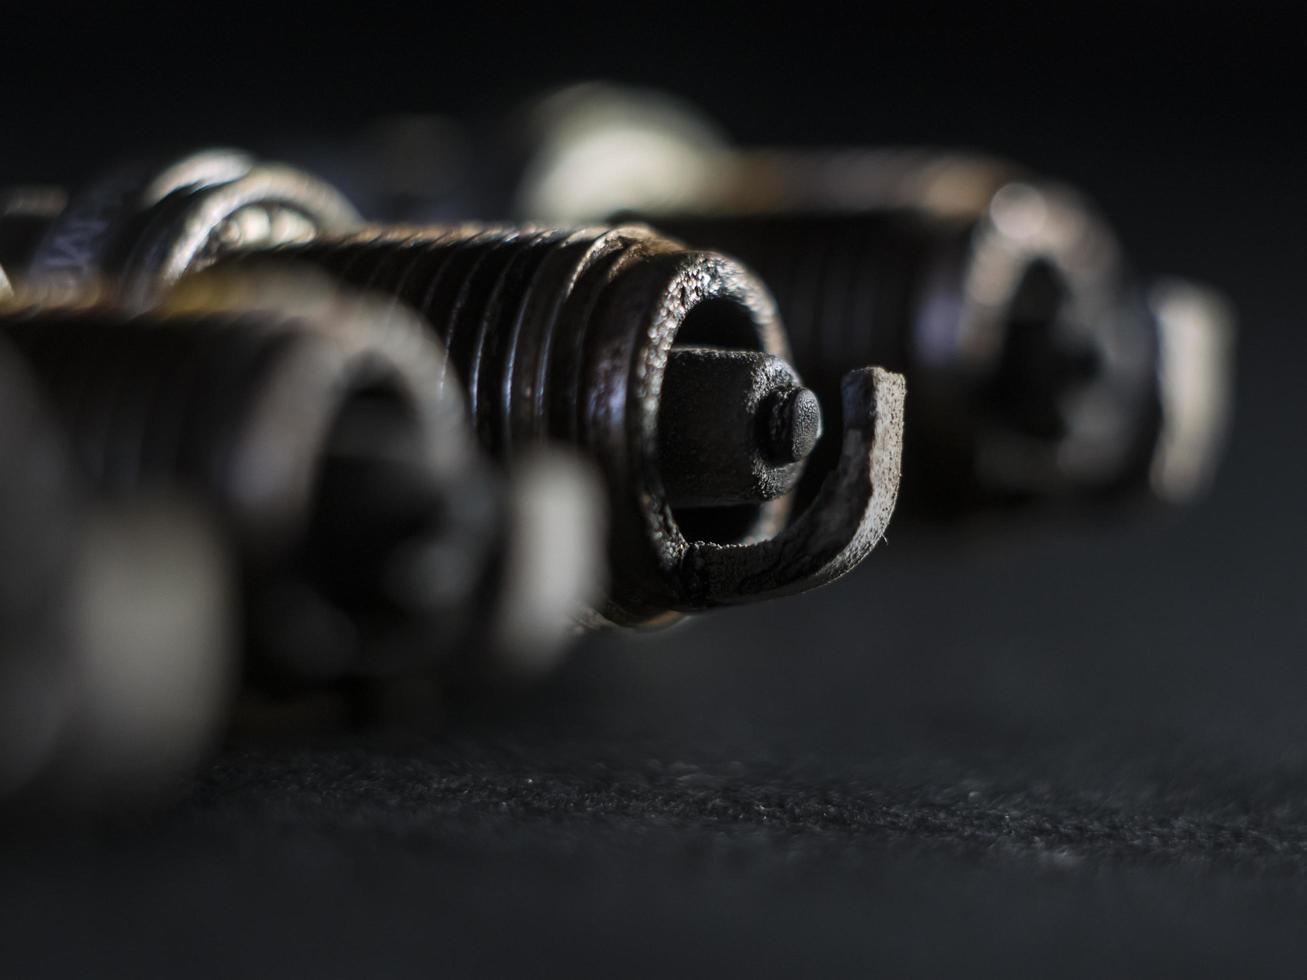 A close-up of a car's faulty spark plugs, against a black background photo